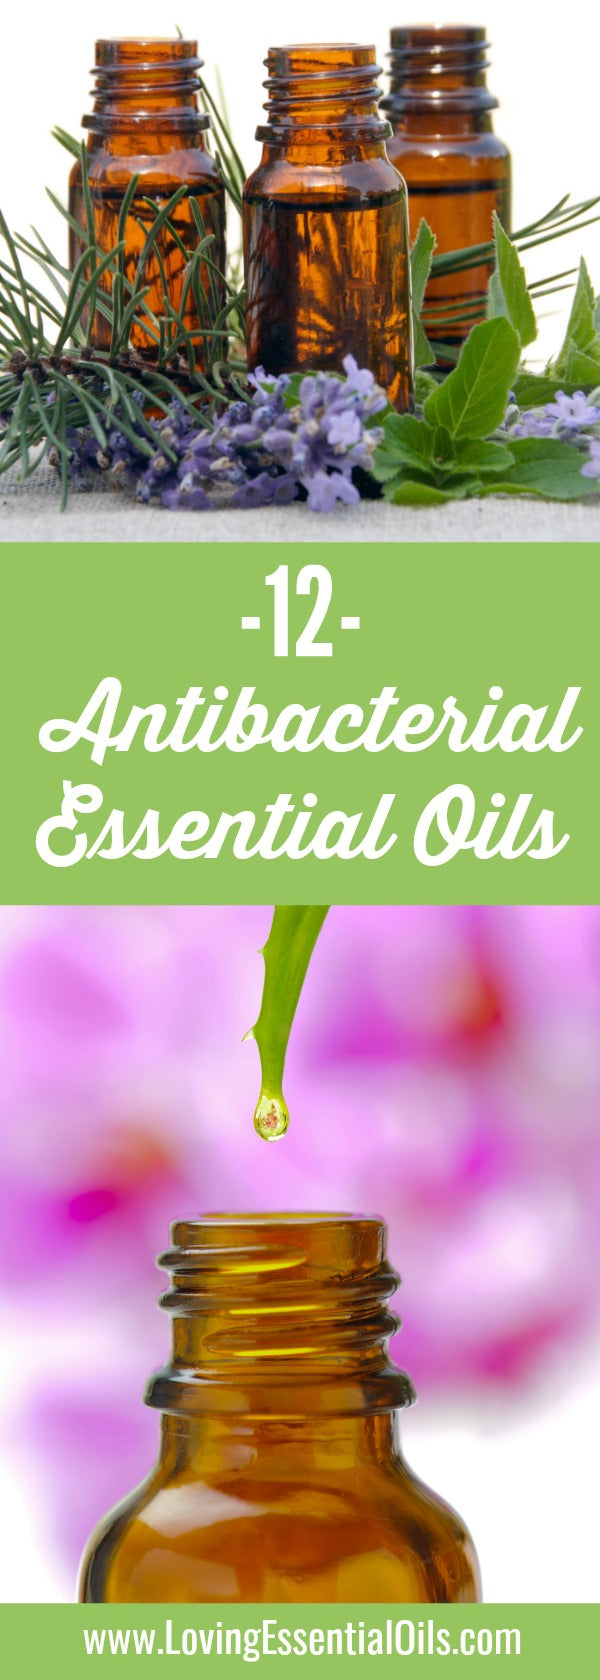 List of Antibacterial Essential Oils for Aromatherapy by Loving Essential Oils